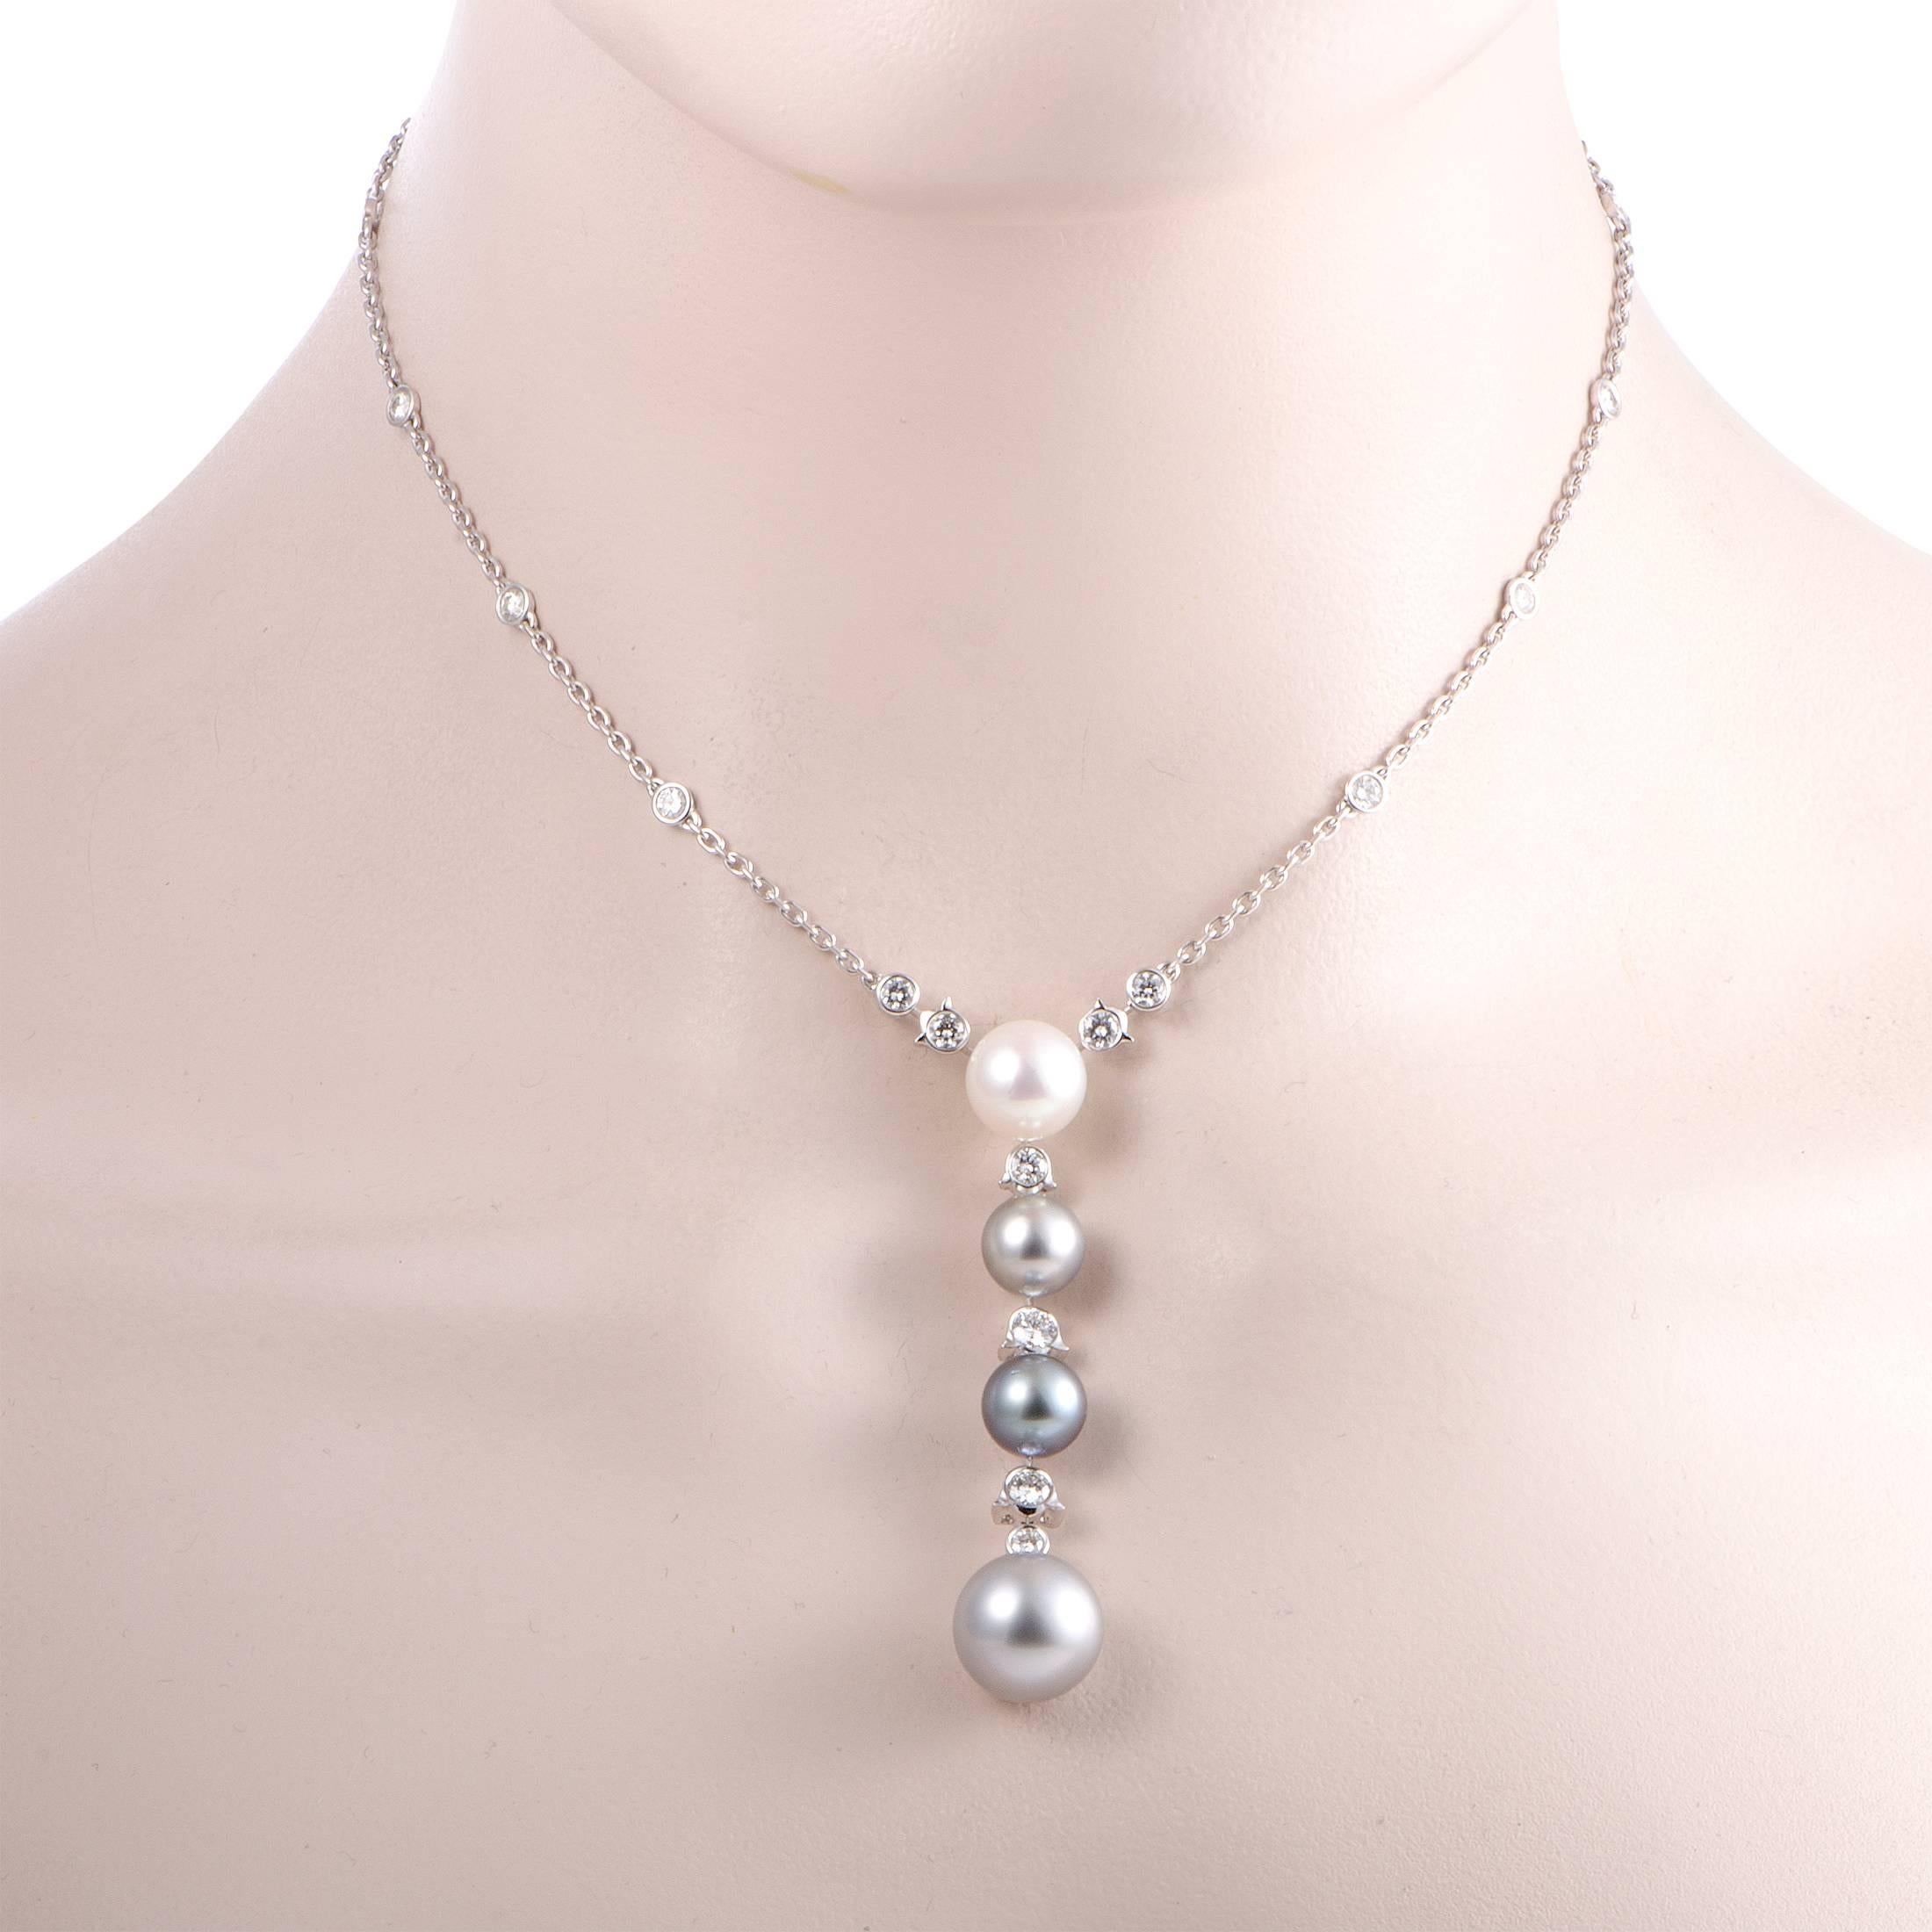 The sublime gleam of pearls is harmoniously complemented by the prestigious sheen of 18K white gold in this splendid necklace designed by Cartier. Apart from the pearls, the necklace is also embellished with scintillating diamonds that weigh 1.50